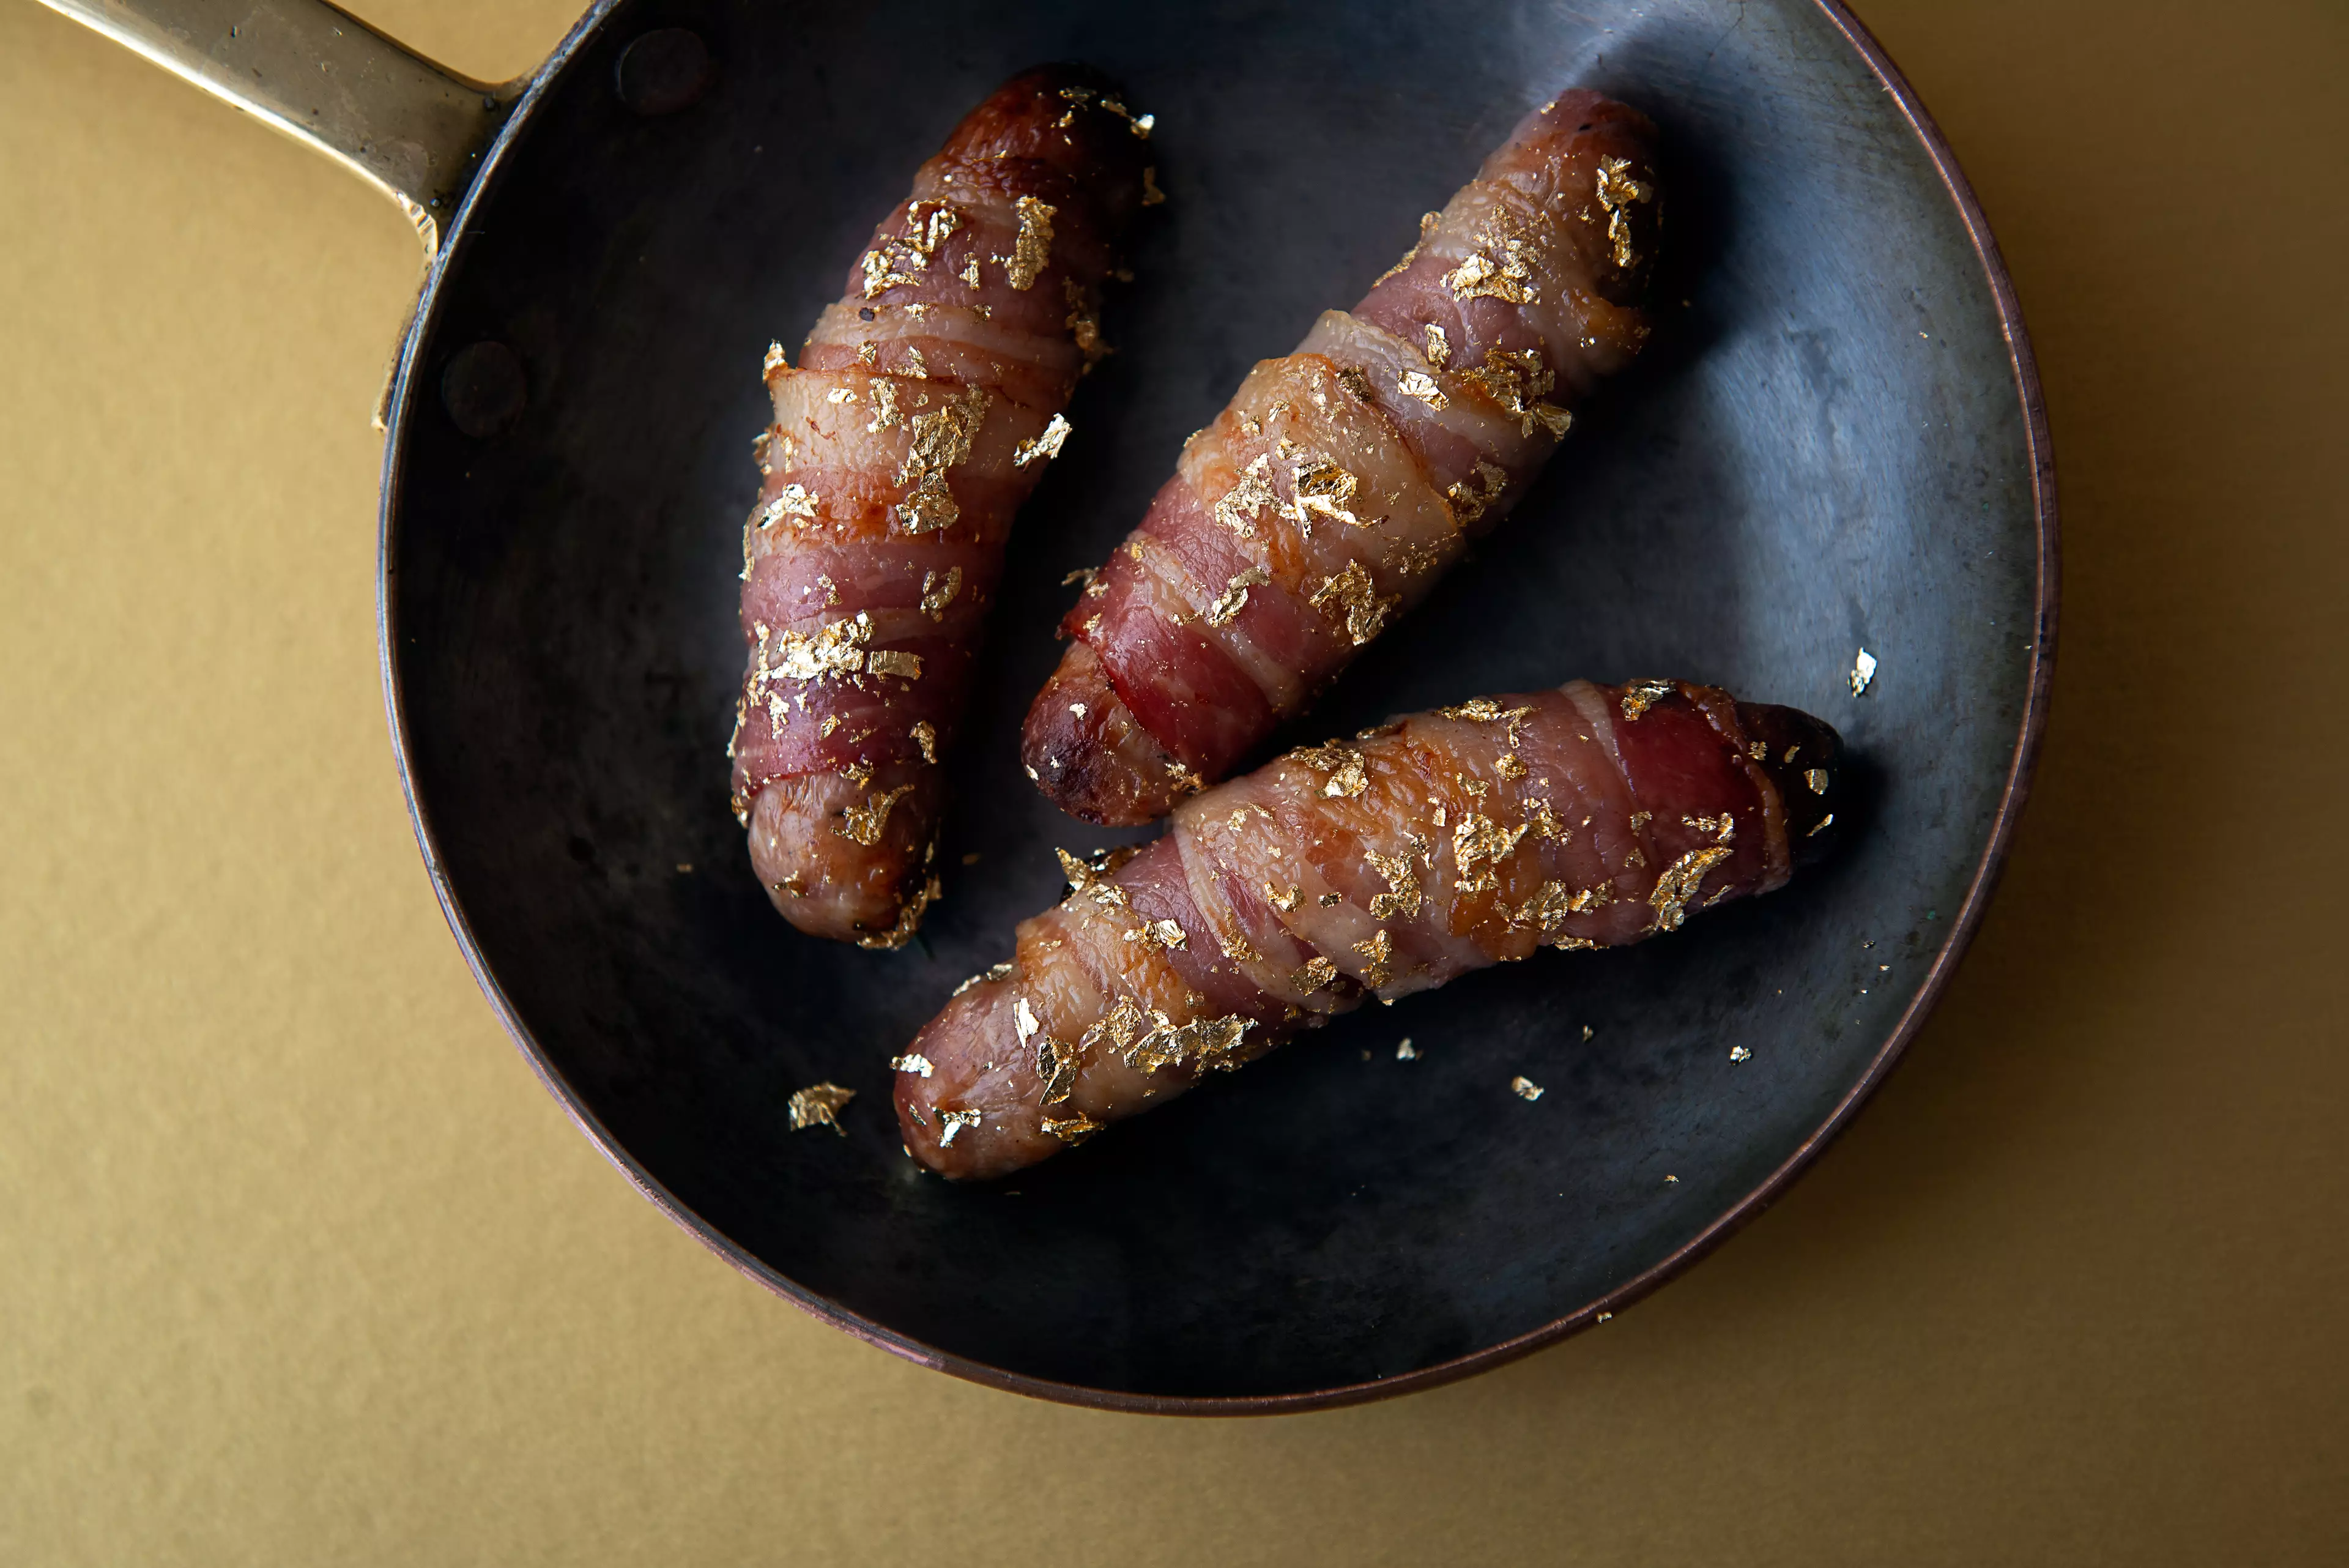 Farmison&Co's golden pigs in blankets are £60 for a pack of six (